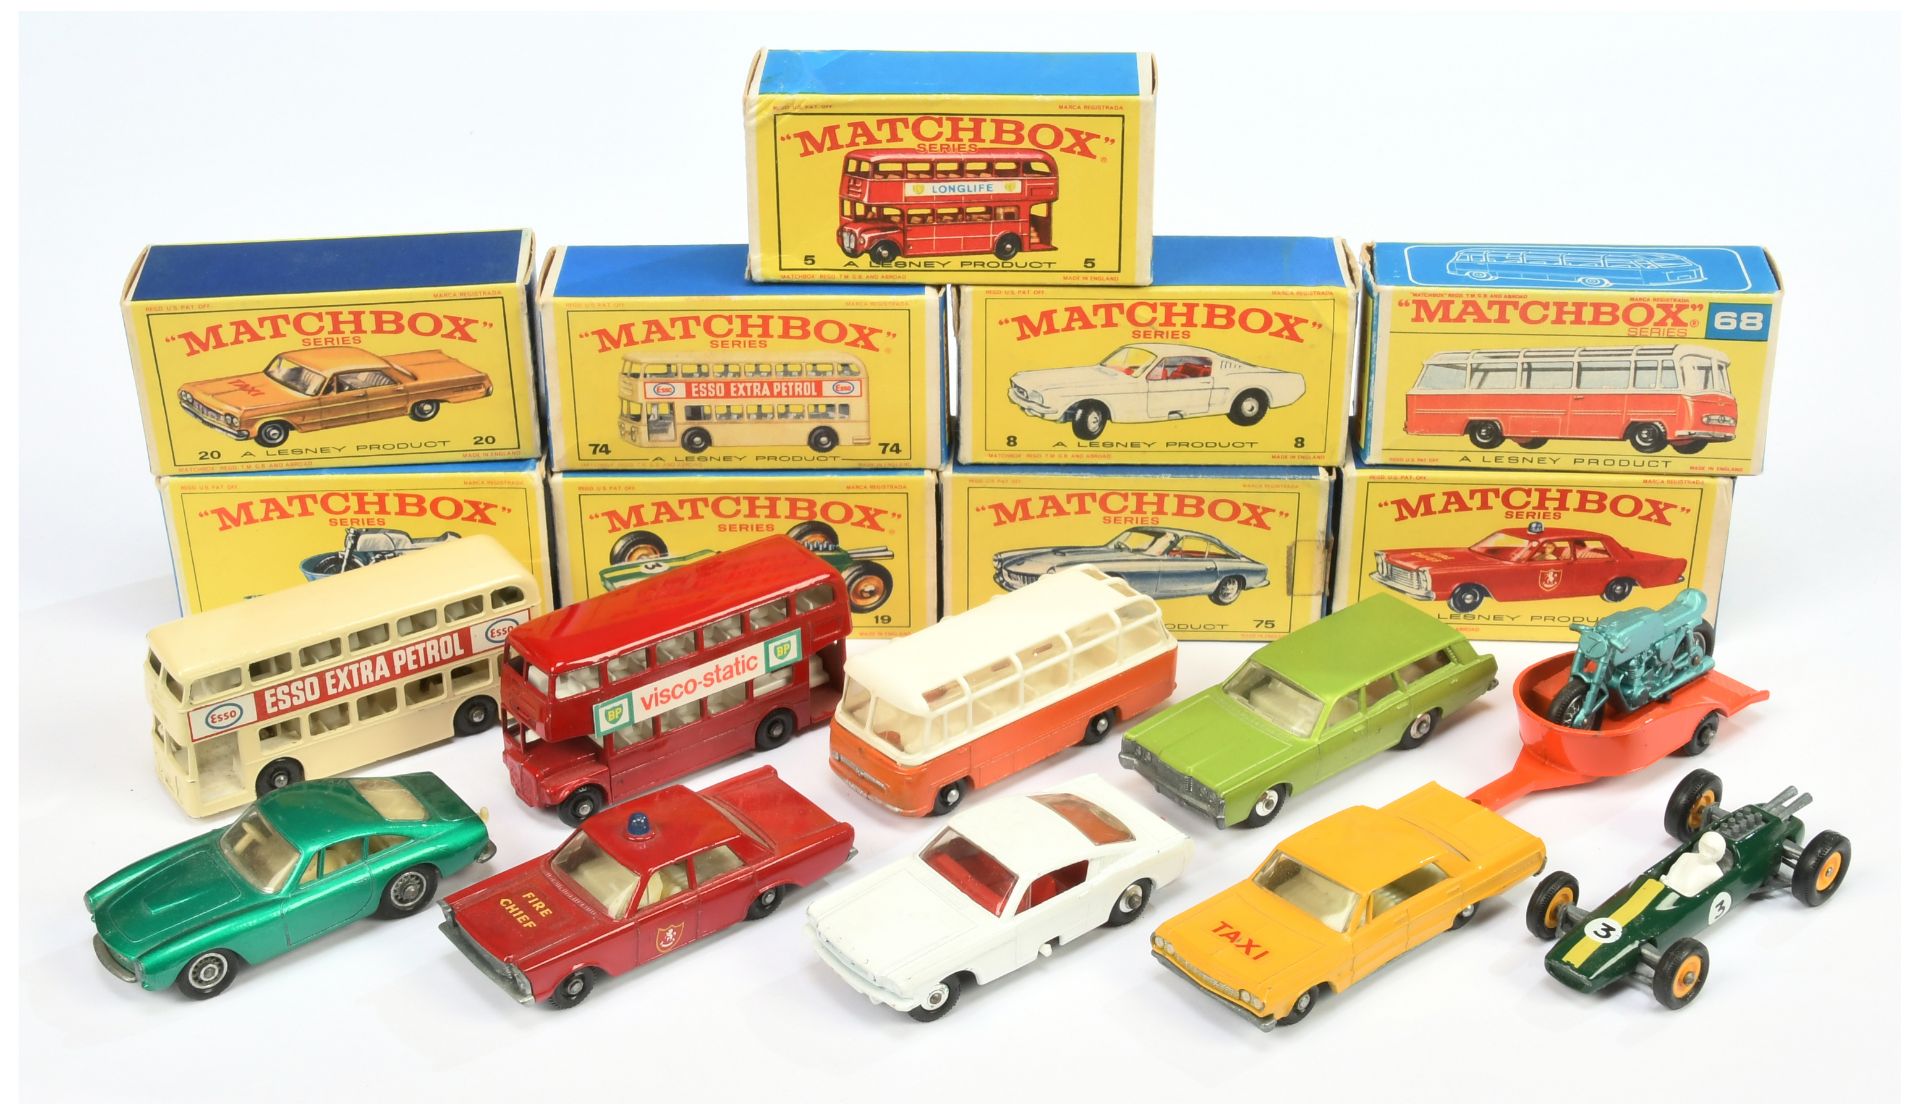 Matchbox Regular wheels group of mid-late 1960's issue models.